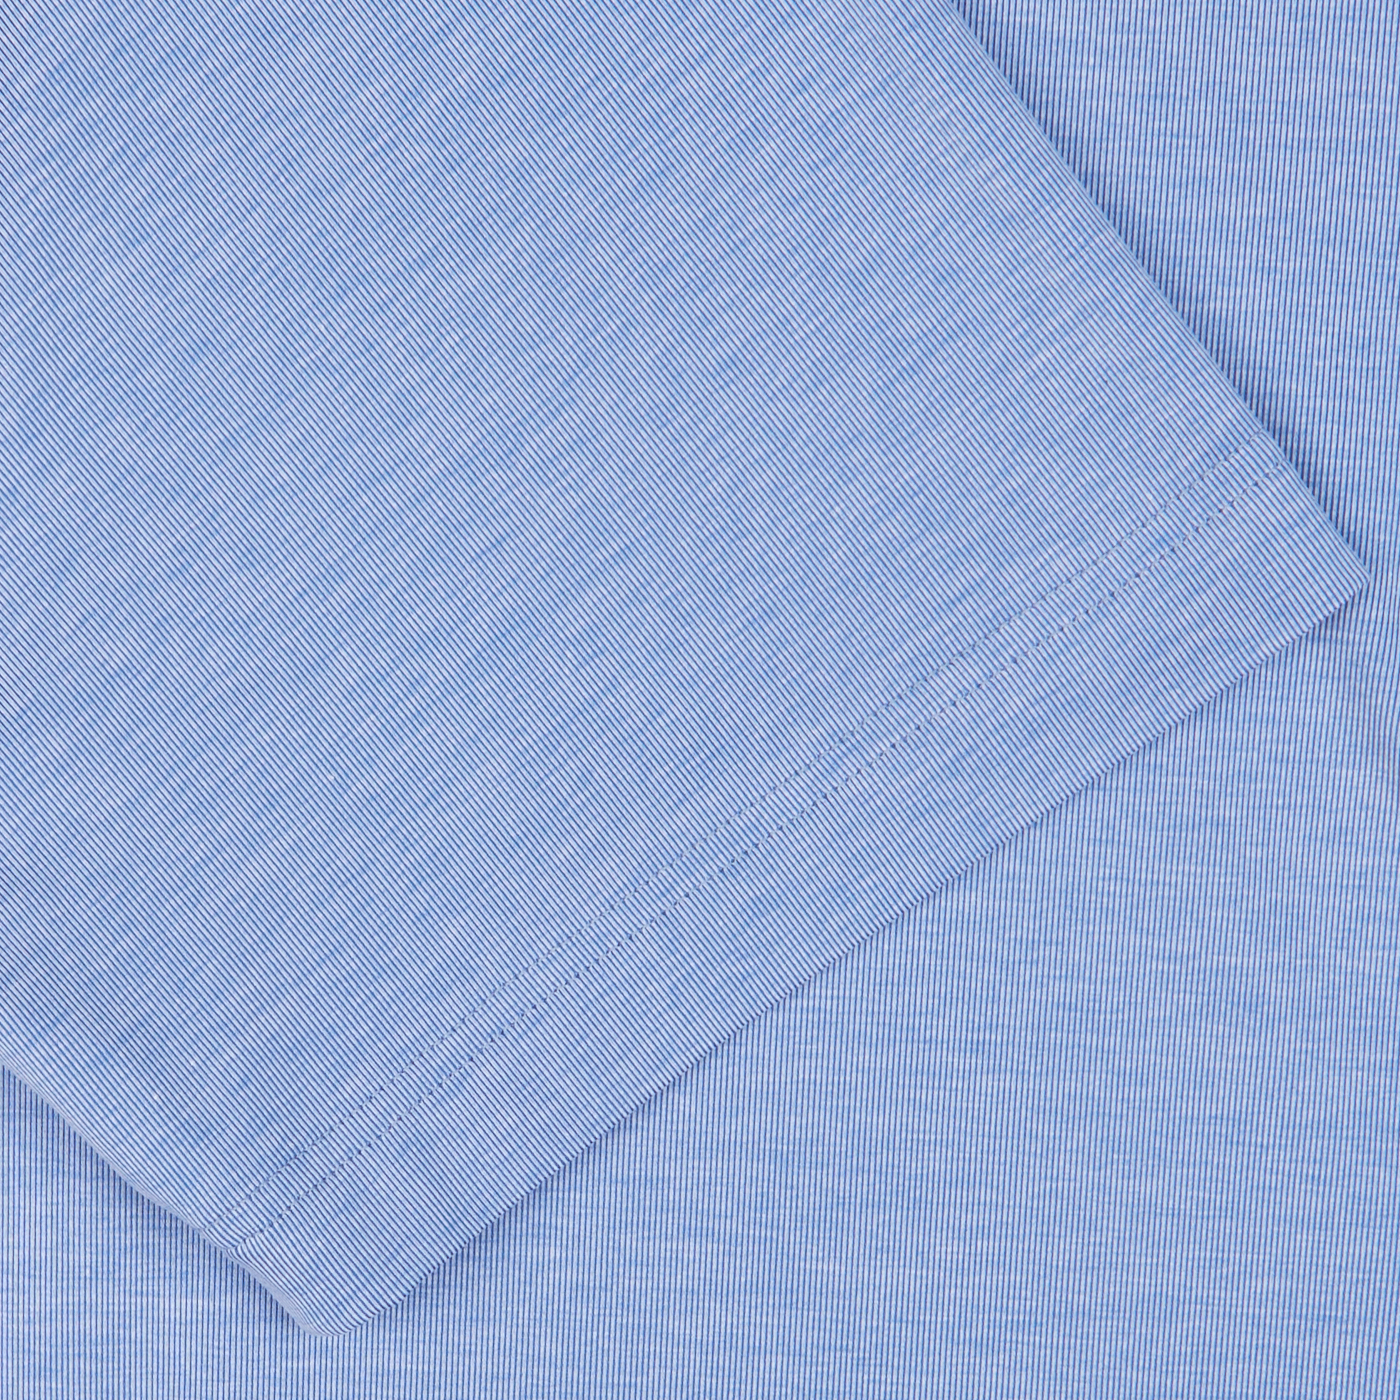 Close-up of Fedeli's Blue Fil-a-Fil Cotton Jersey Polo Shirt with a diagonal weave pattern.